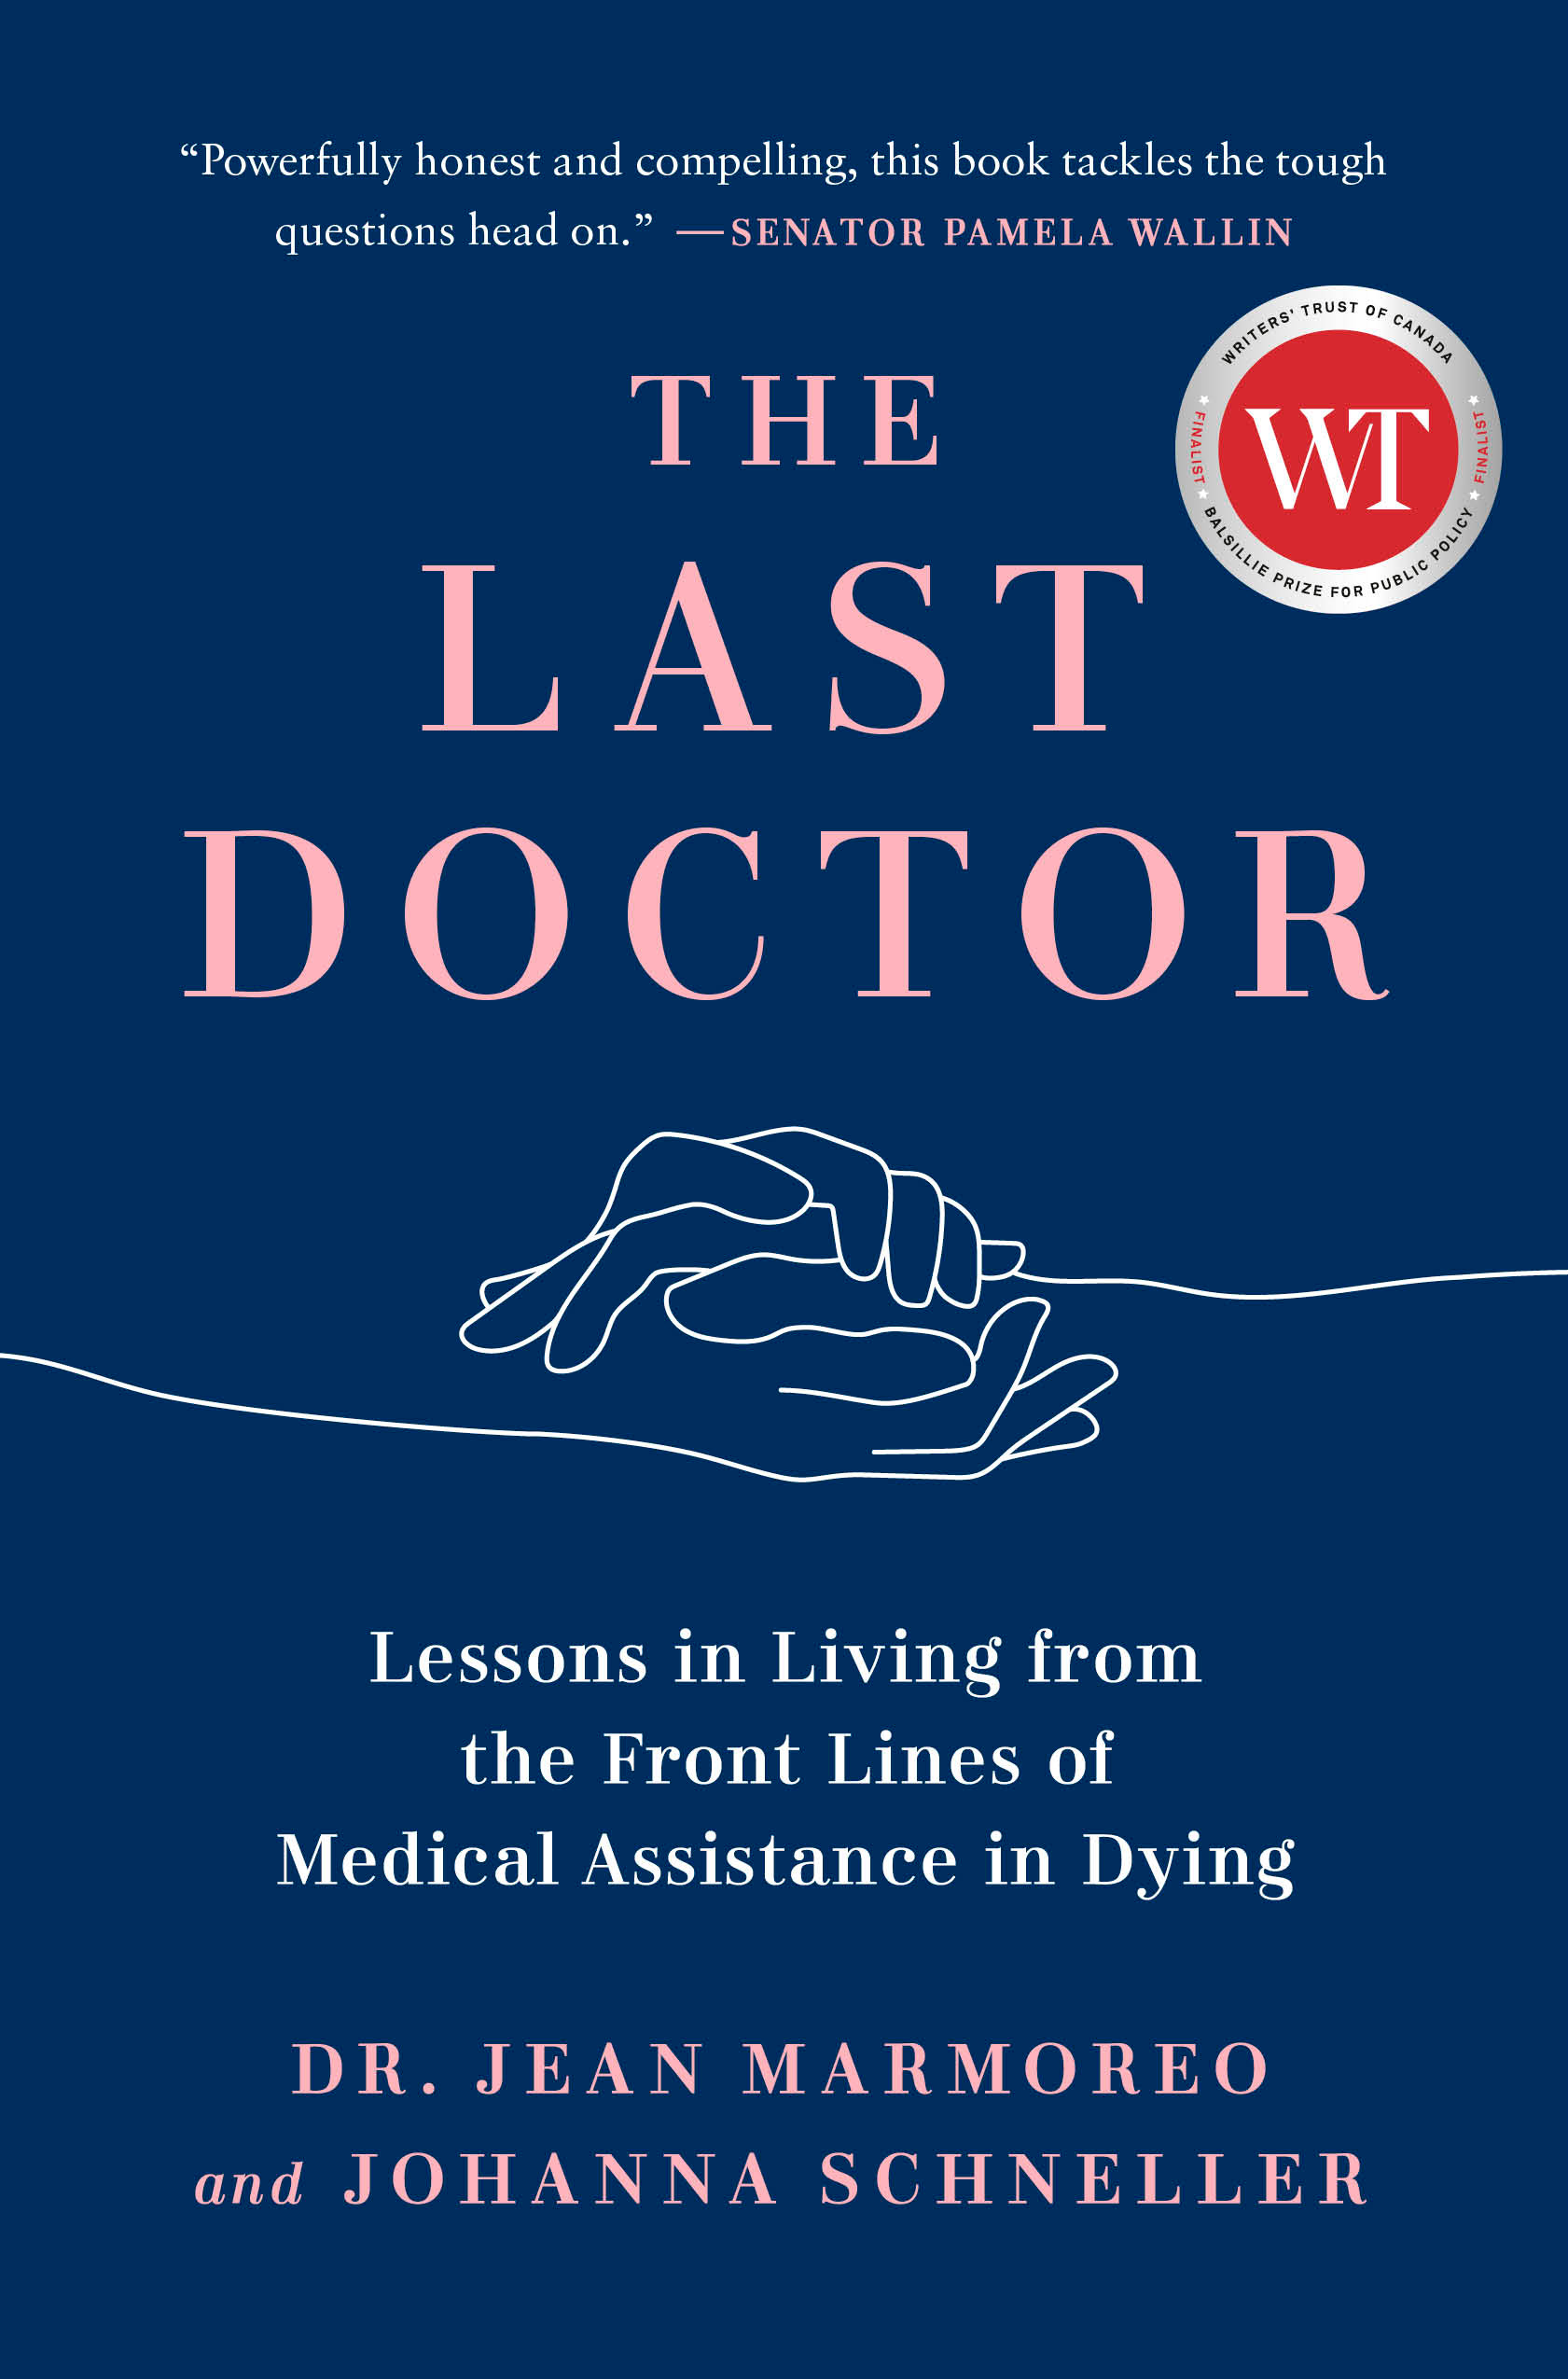 The Last Doctor : Lessons in Living from the Front Lines of Medical Assistance in Dying | Biography & Memoir